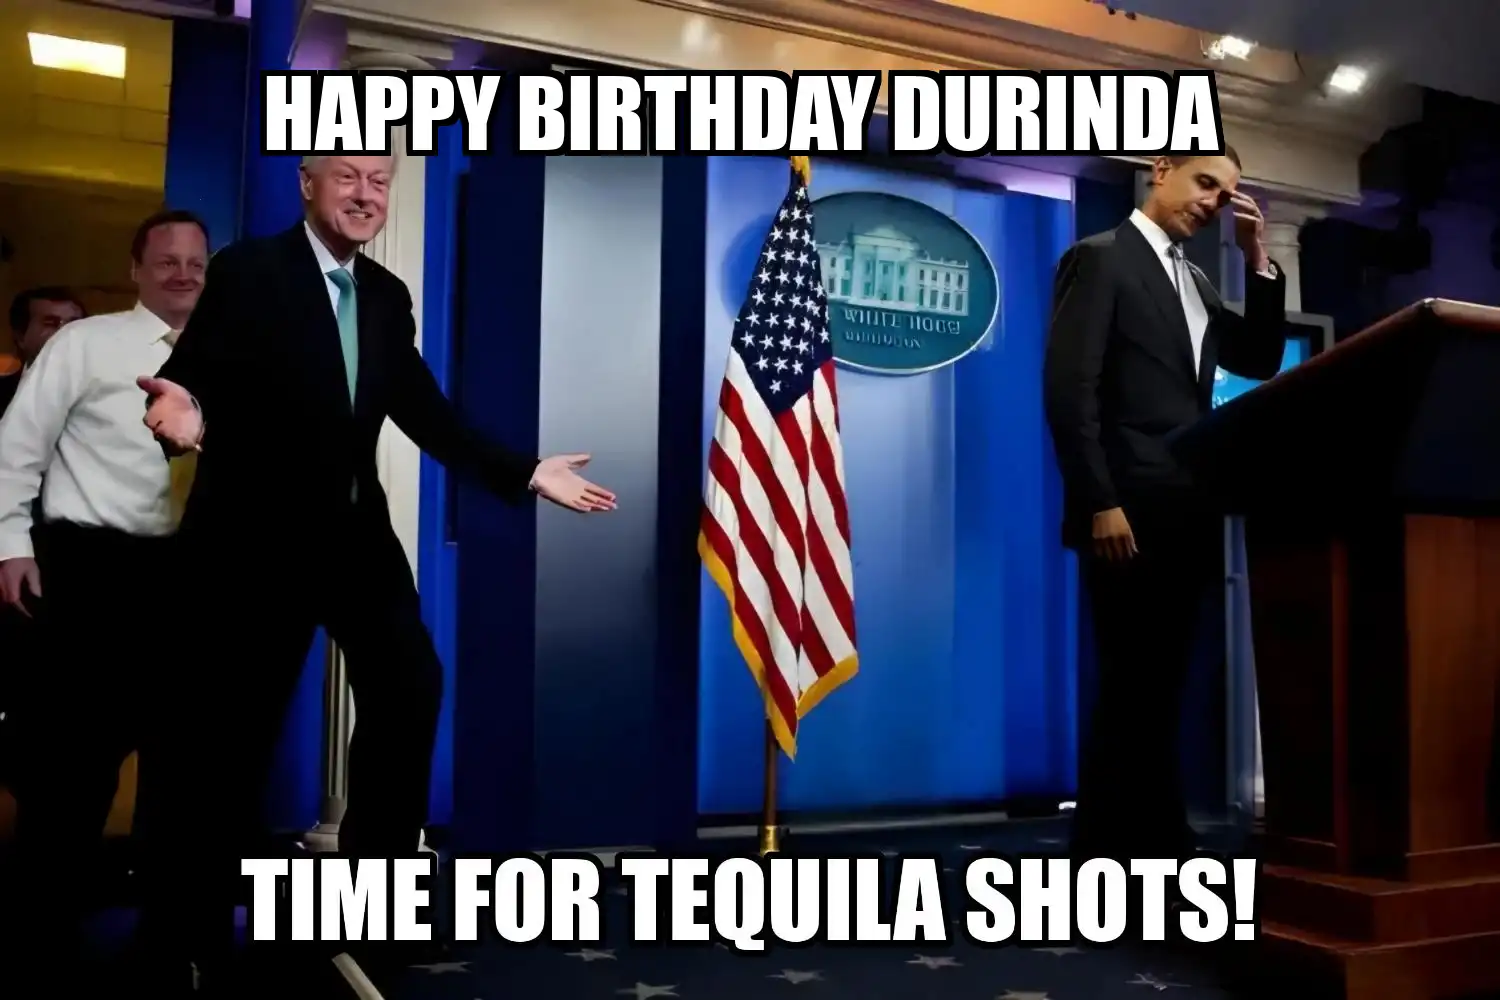 Happy Birthday Durinda Time For Tequila Shots Memes